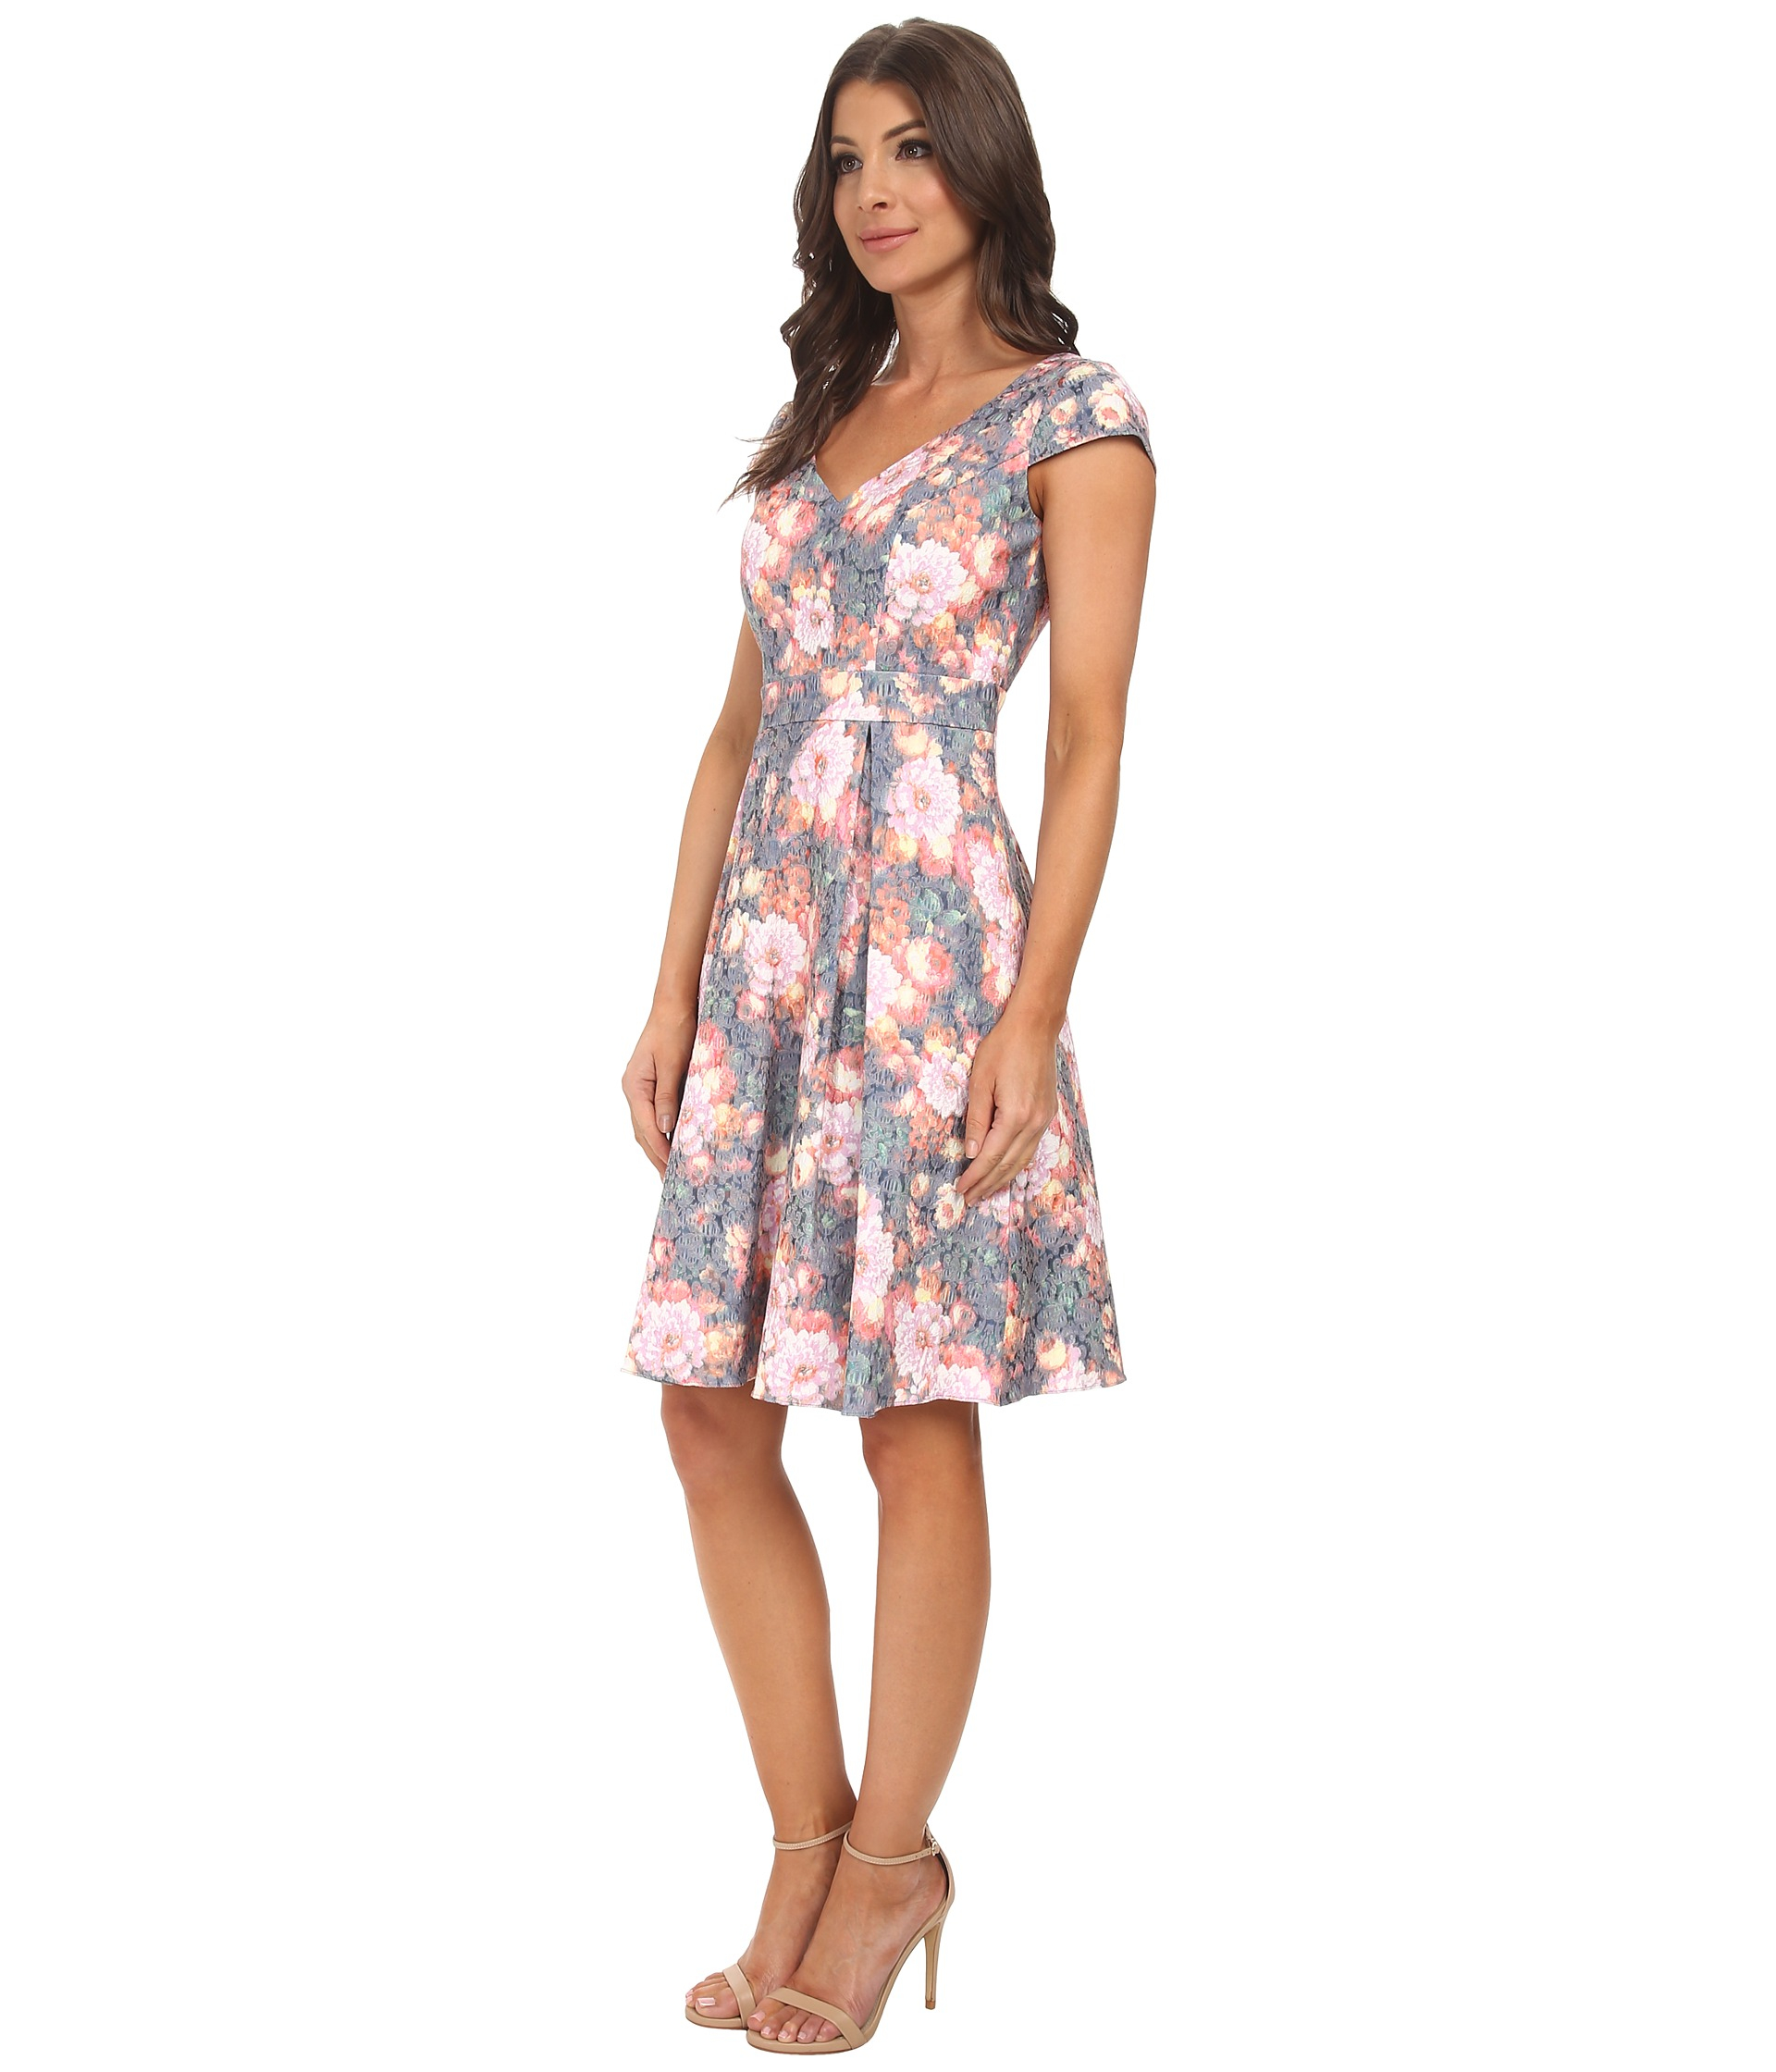 Lyst - Adrianna Papell Floral Jacquard Pleated Fit & Flare Dress